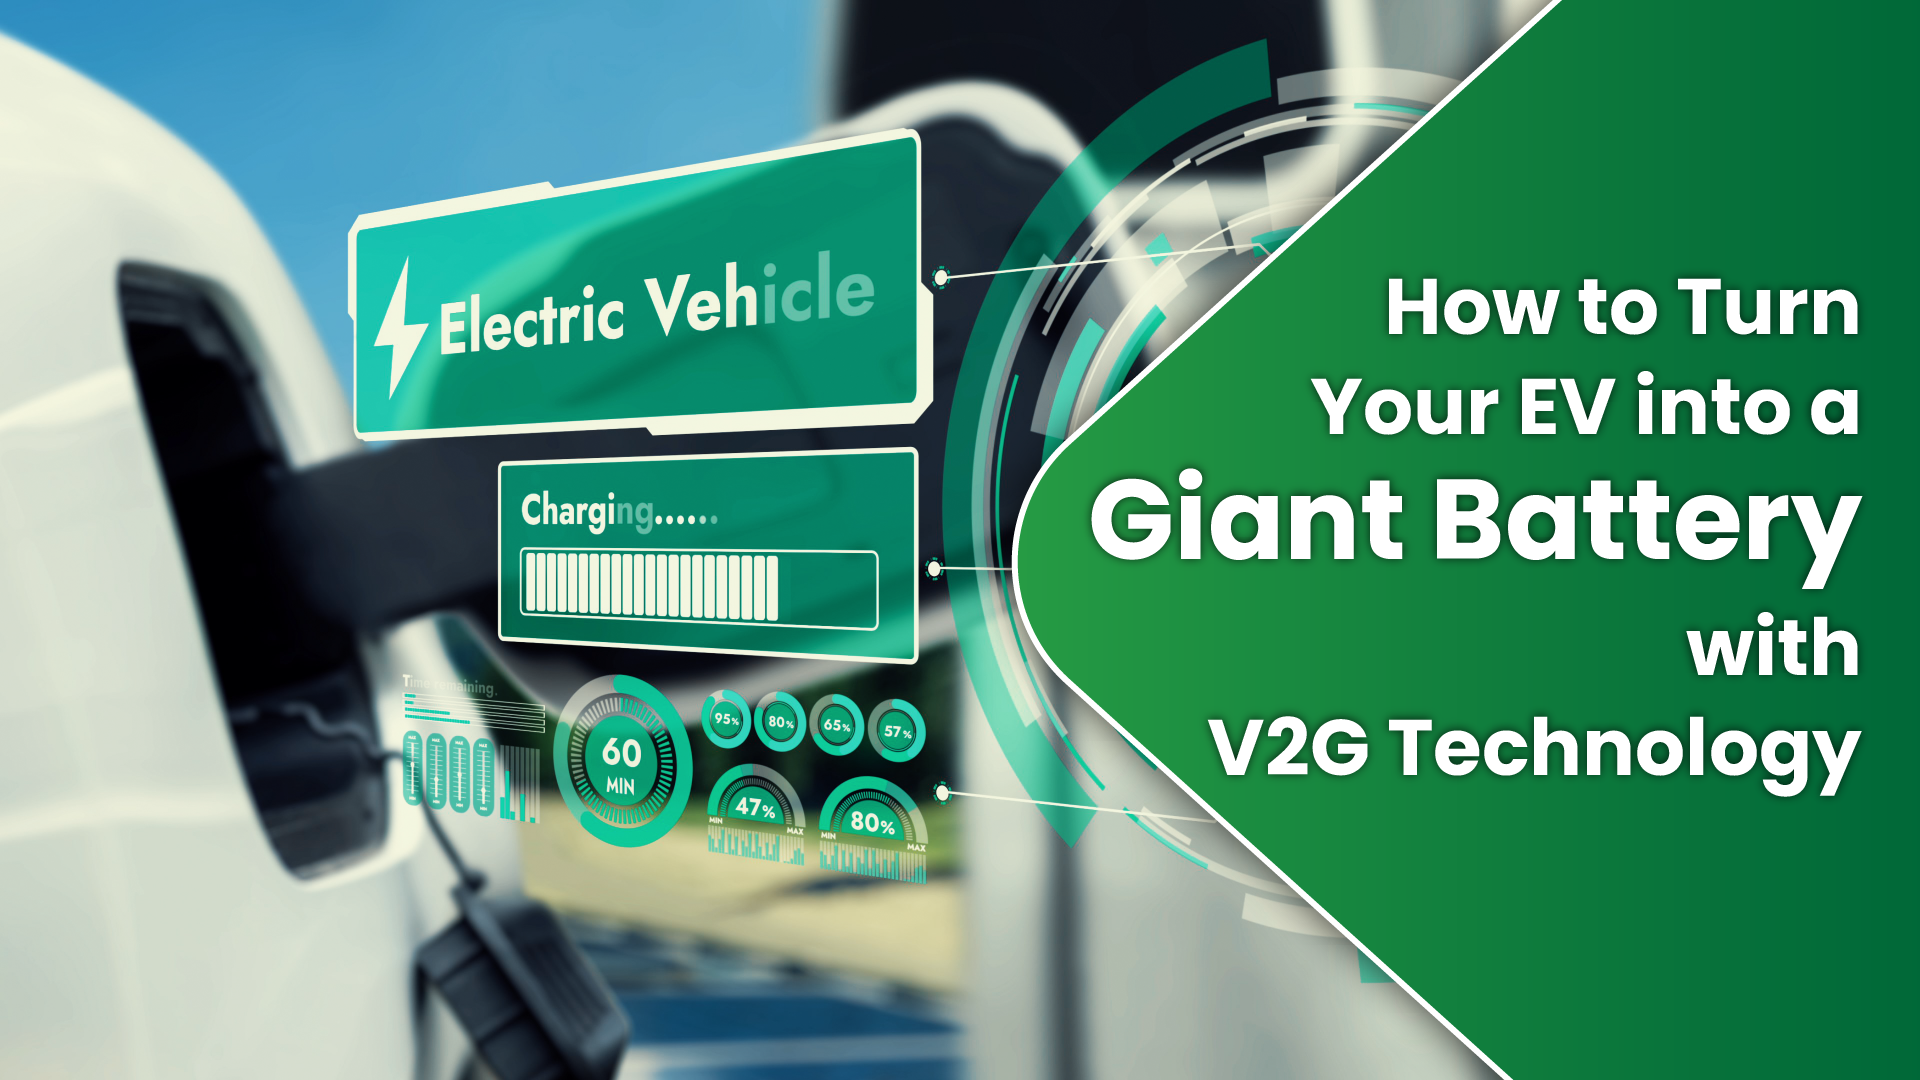 How to Turn Your EV into a Giant Battery with V2G Technology? 